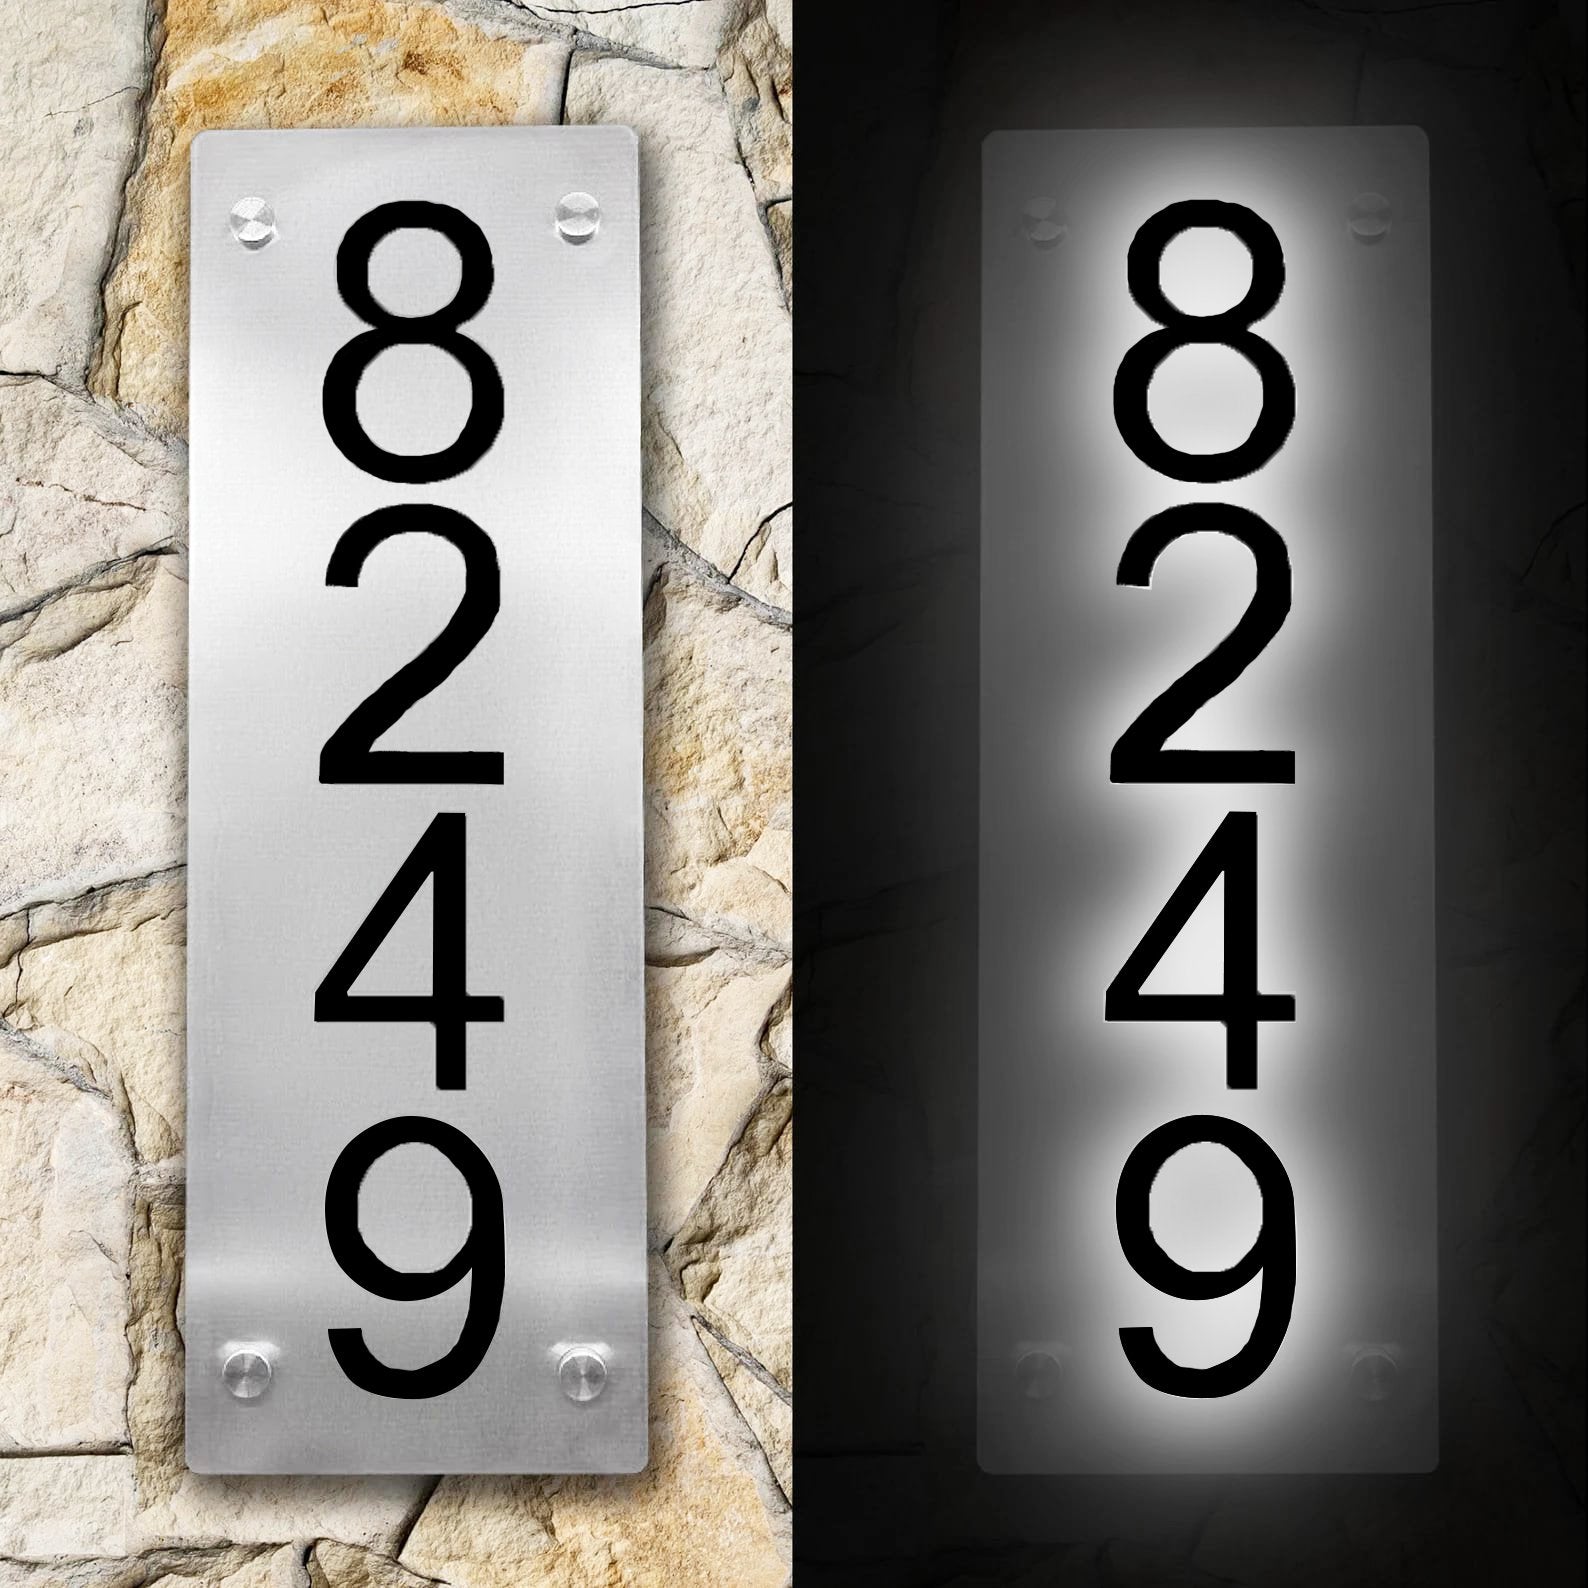 Solar House Numbers Sign - Illuminated address sign with customizable options, metal front plate, and weather-resistant design. Handcrafted in the USA, available in various sizes. Versatile installation options. Quality assurance with a 1-year warranty.